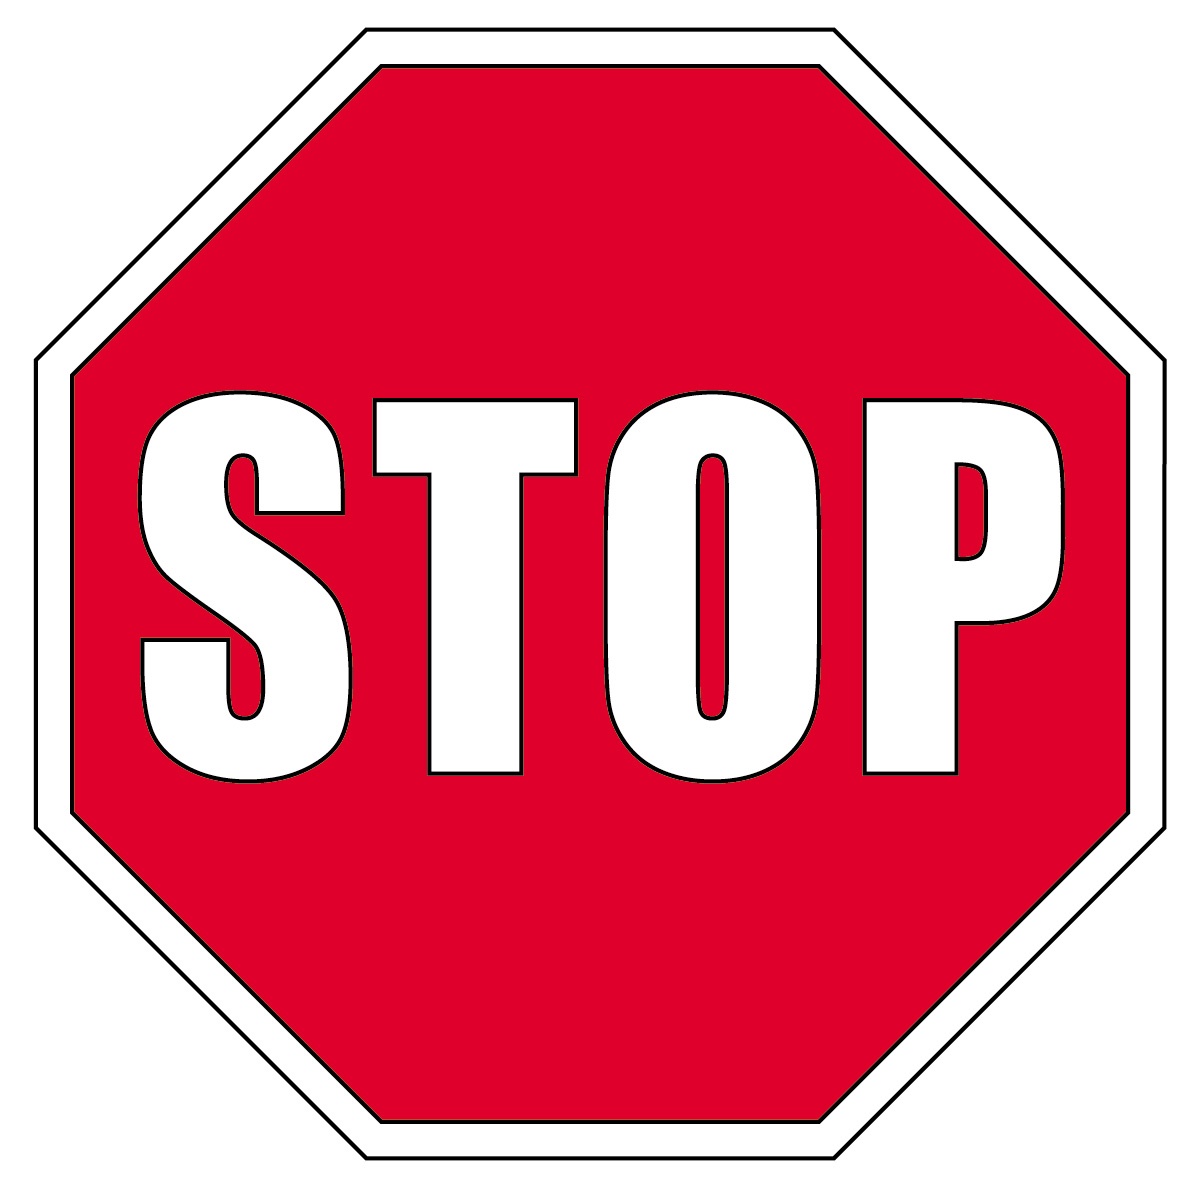 Free Printable Stop Signs, Download Free Clip Art, Free Clip Art On - Free Printable Stop Sign To Color